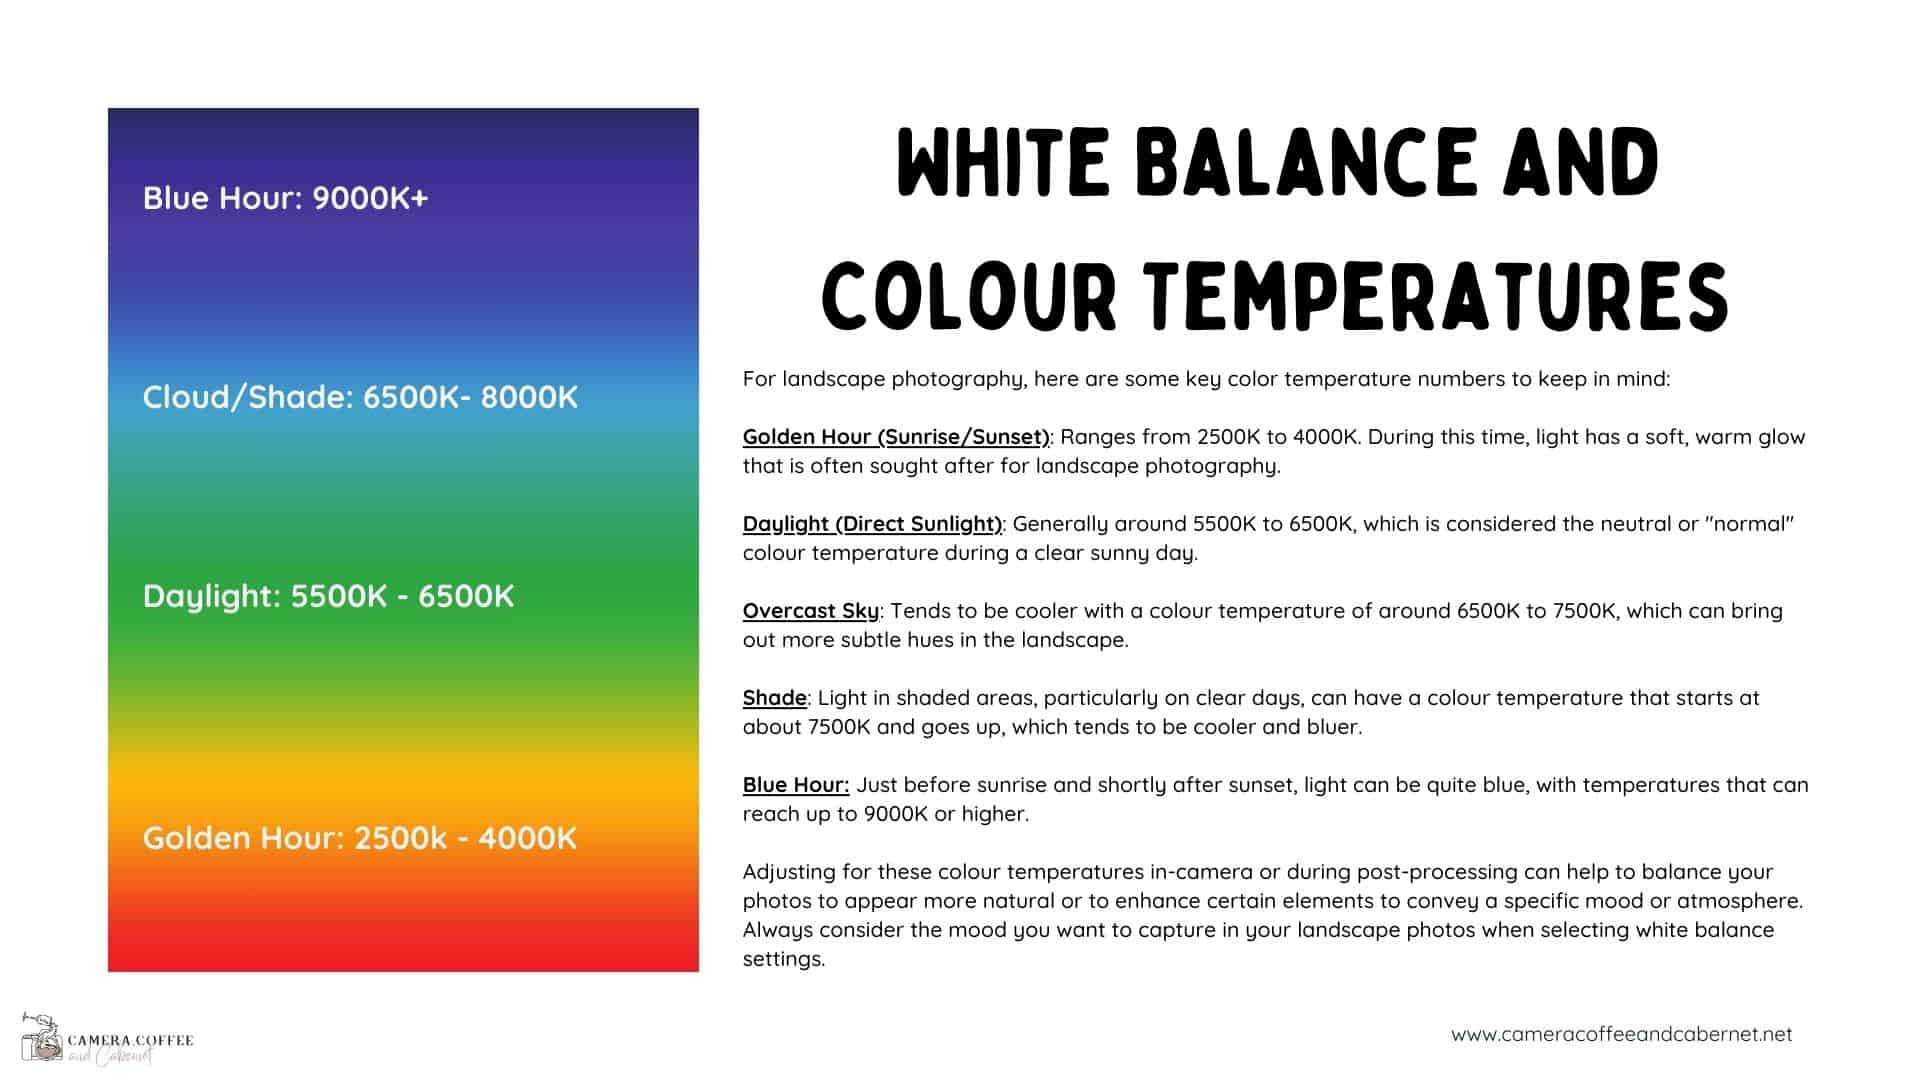 A colorful educational chart explaining 'White Balance and Colour Temperatures' for landscape photography, with a gradient from blue to red indicating different times of day and corresponding Kelvin temperature values